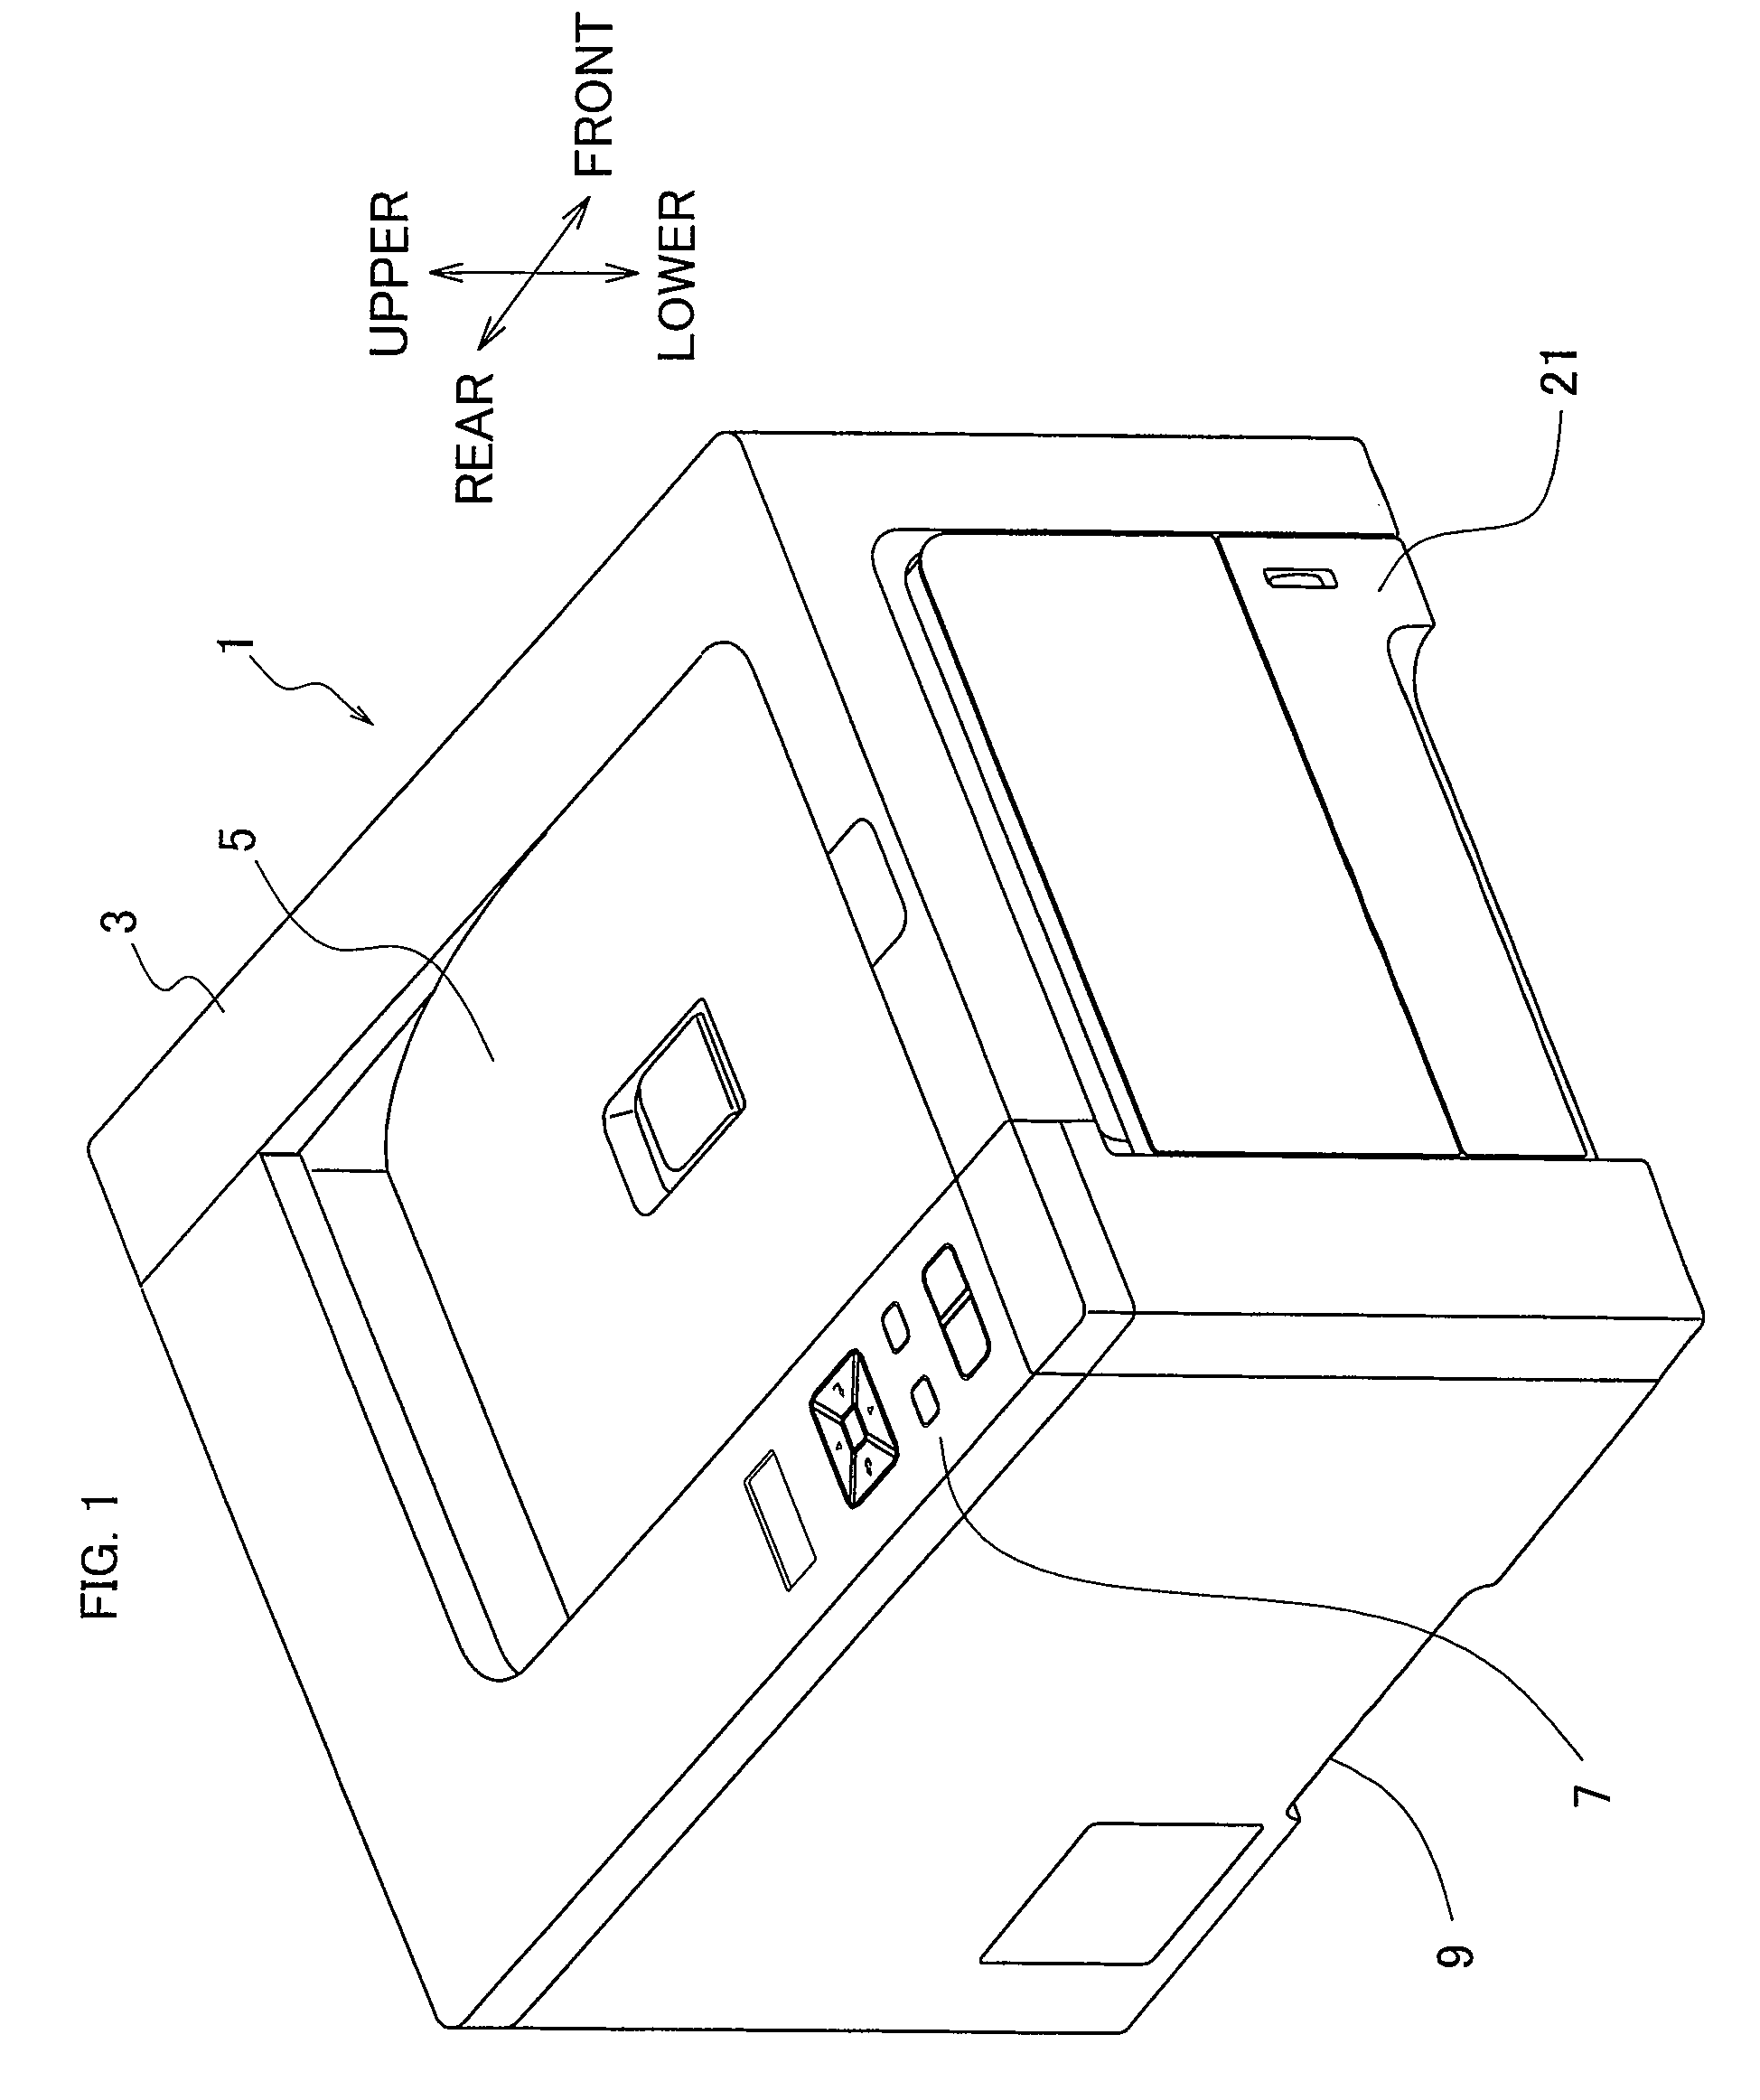 Image forming apparatus including a holding portion having an air vent